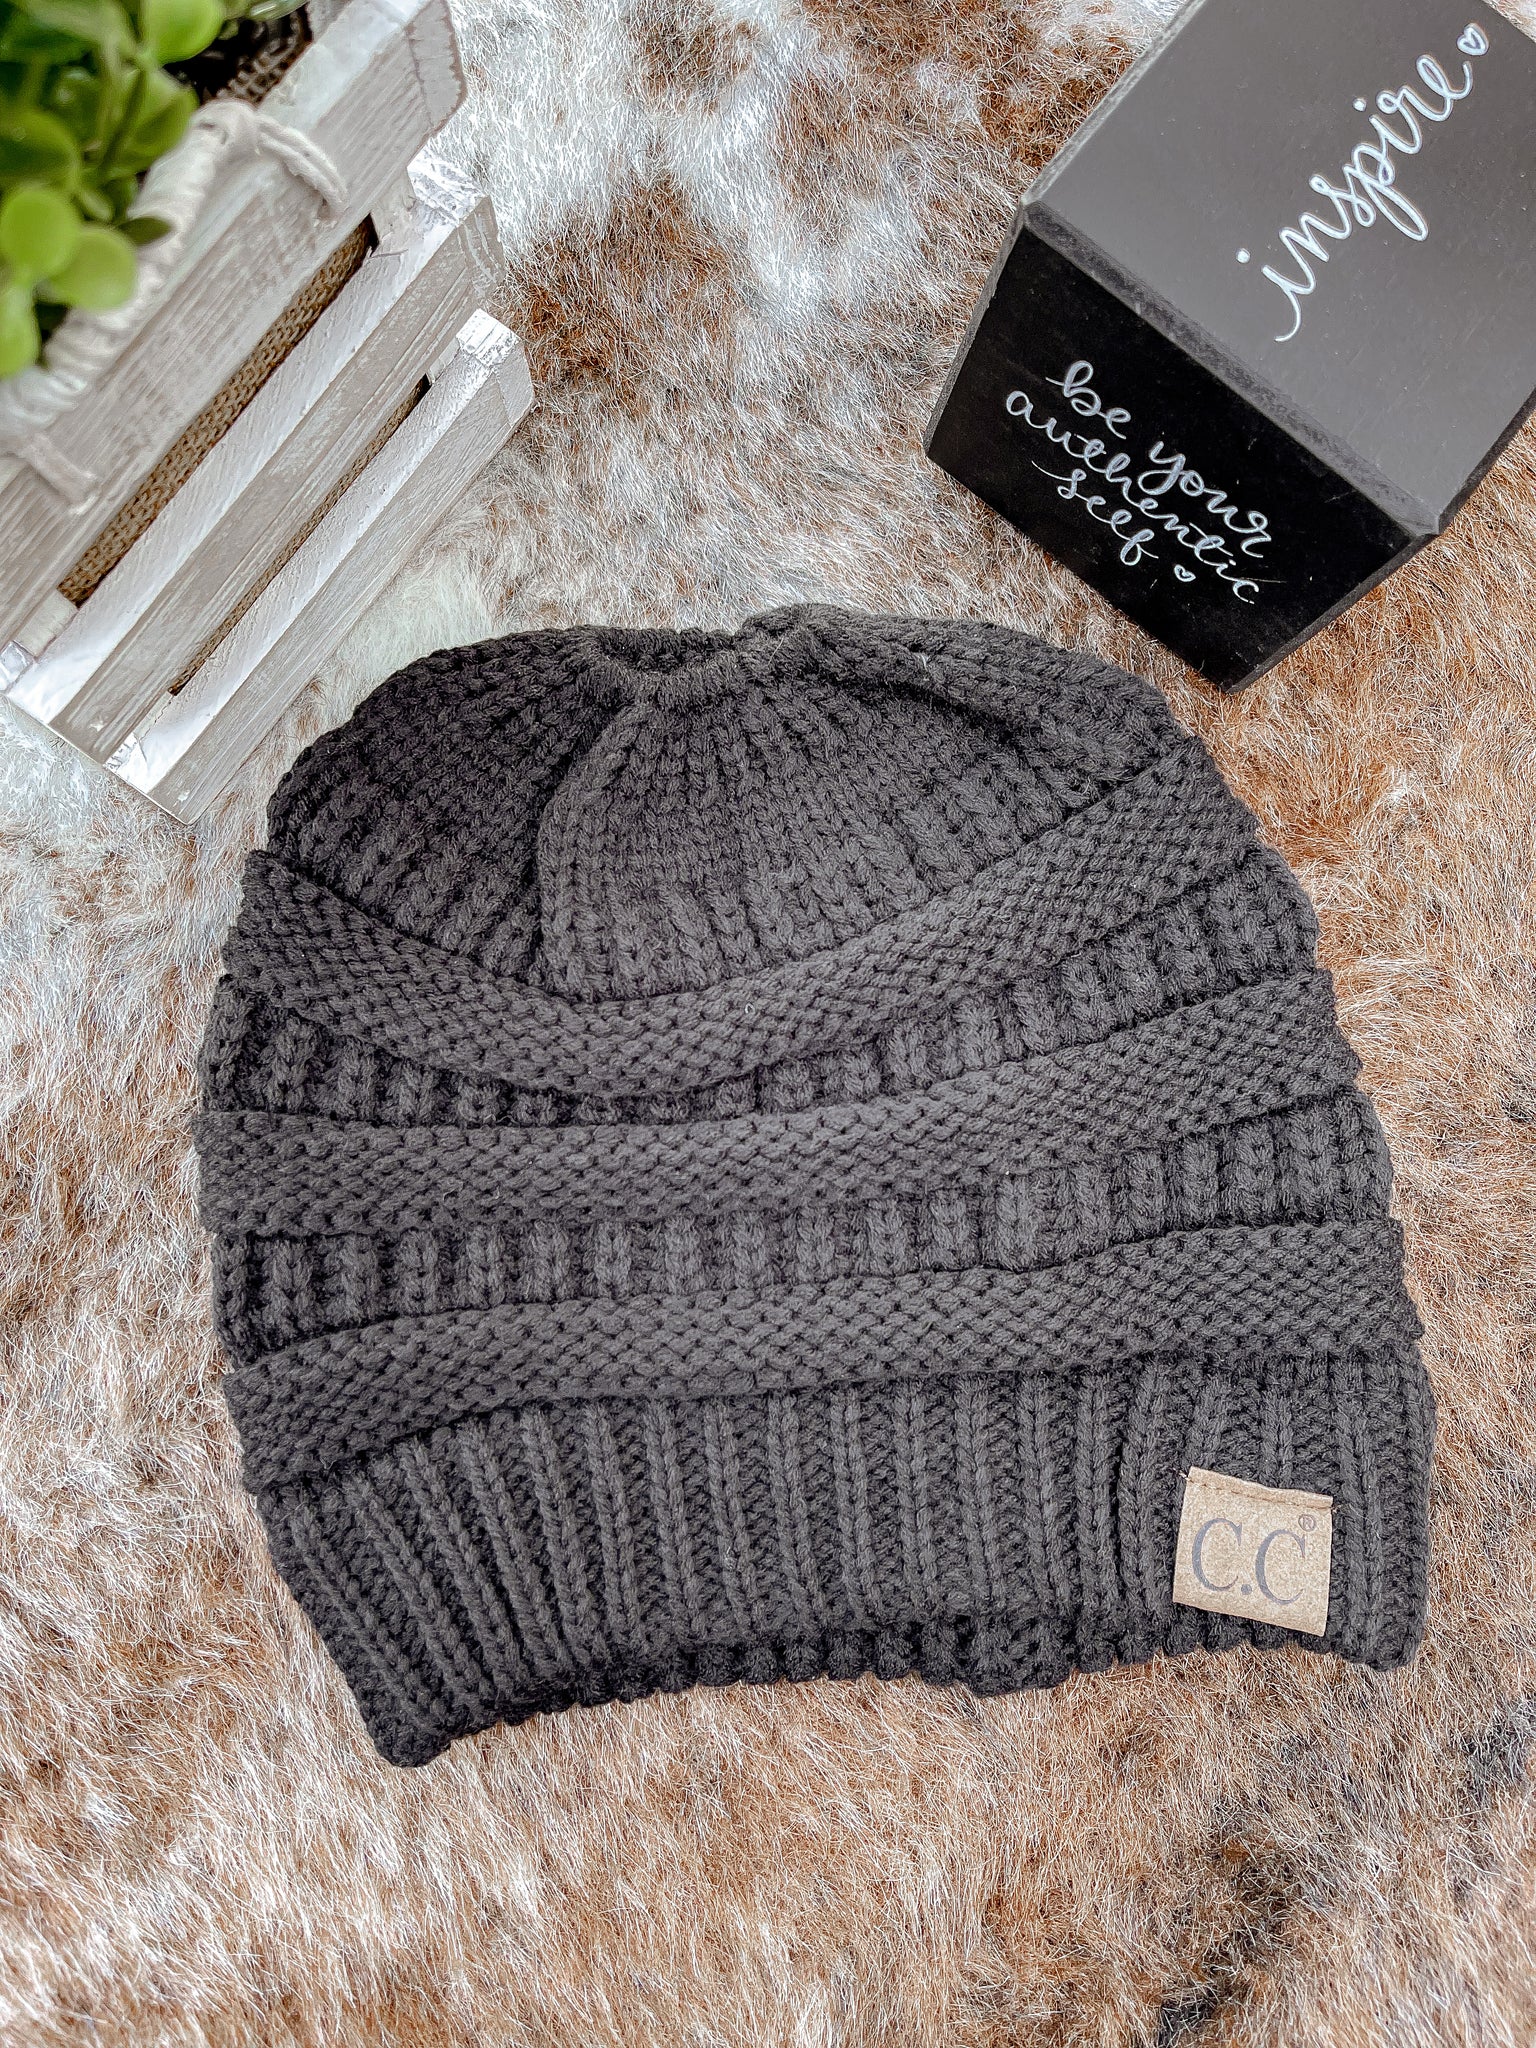 CC Beanie With Pony Tail Opening